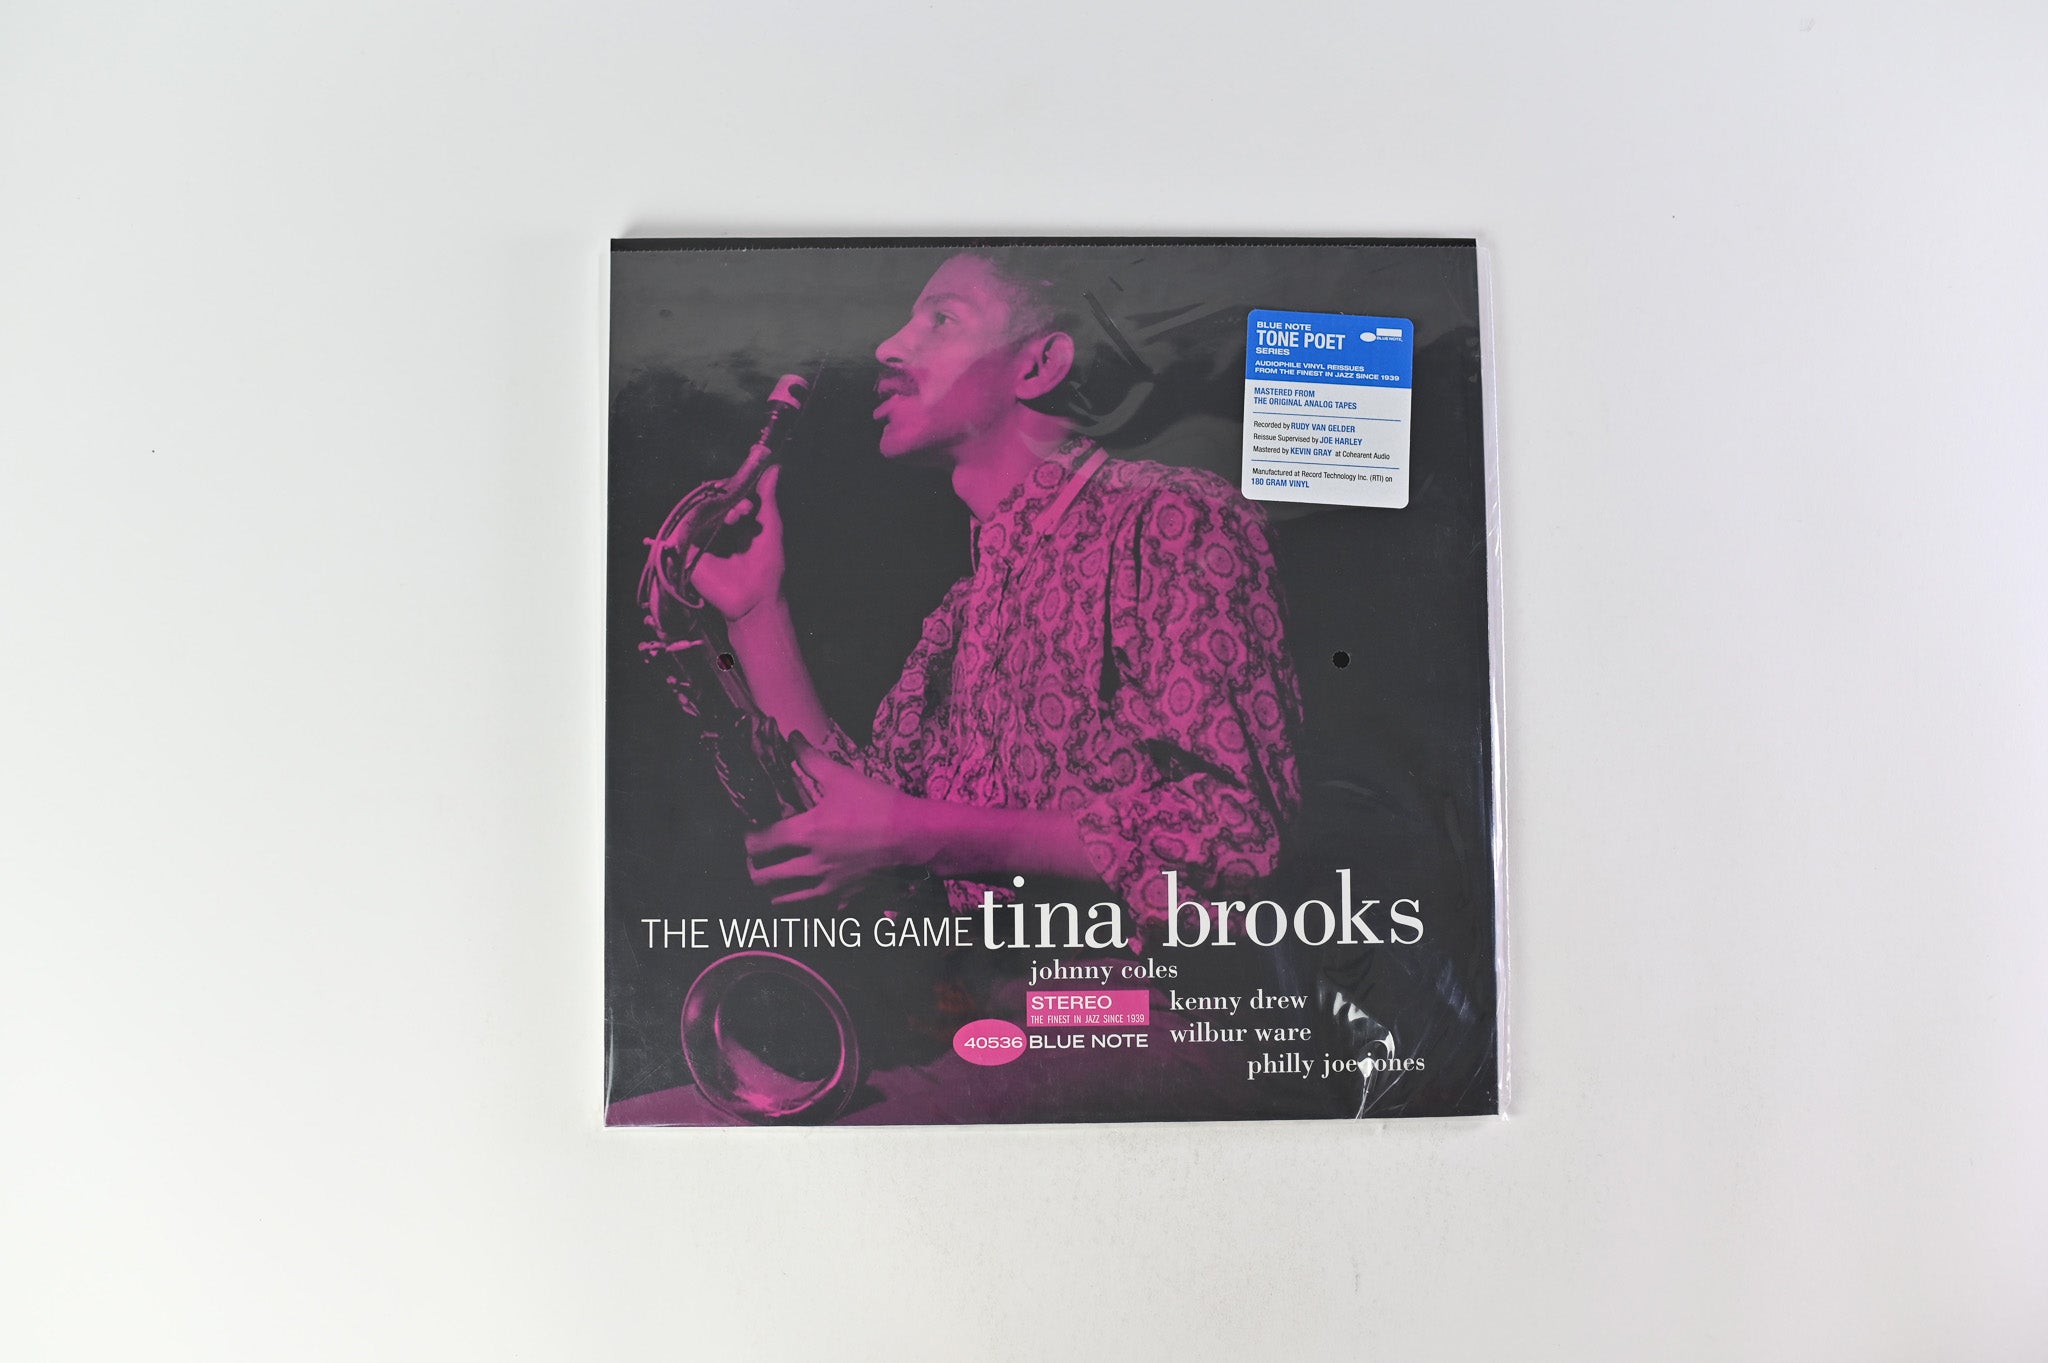 Tina Brooks - The Waiting Game on Blue Note Tone Poet Series